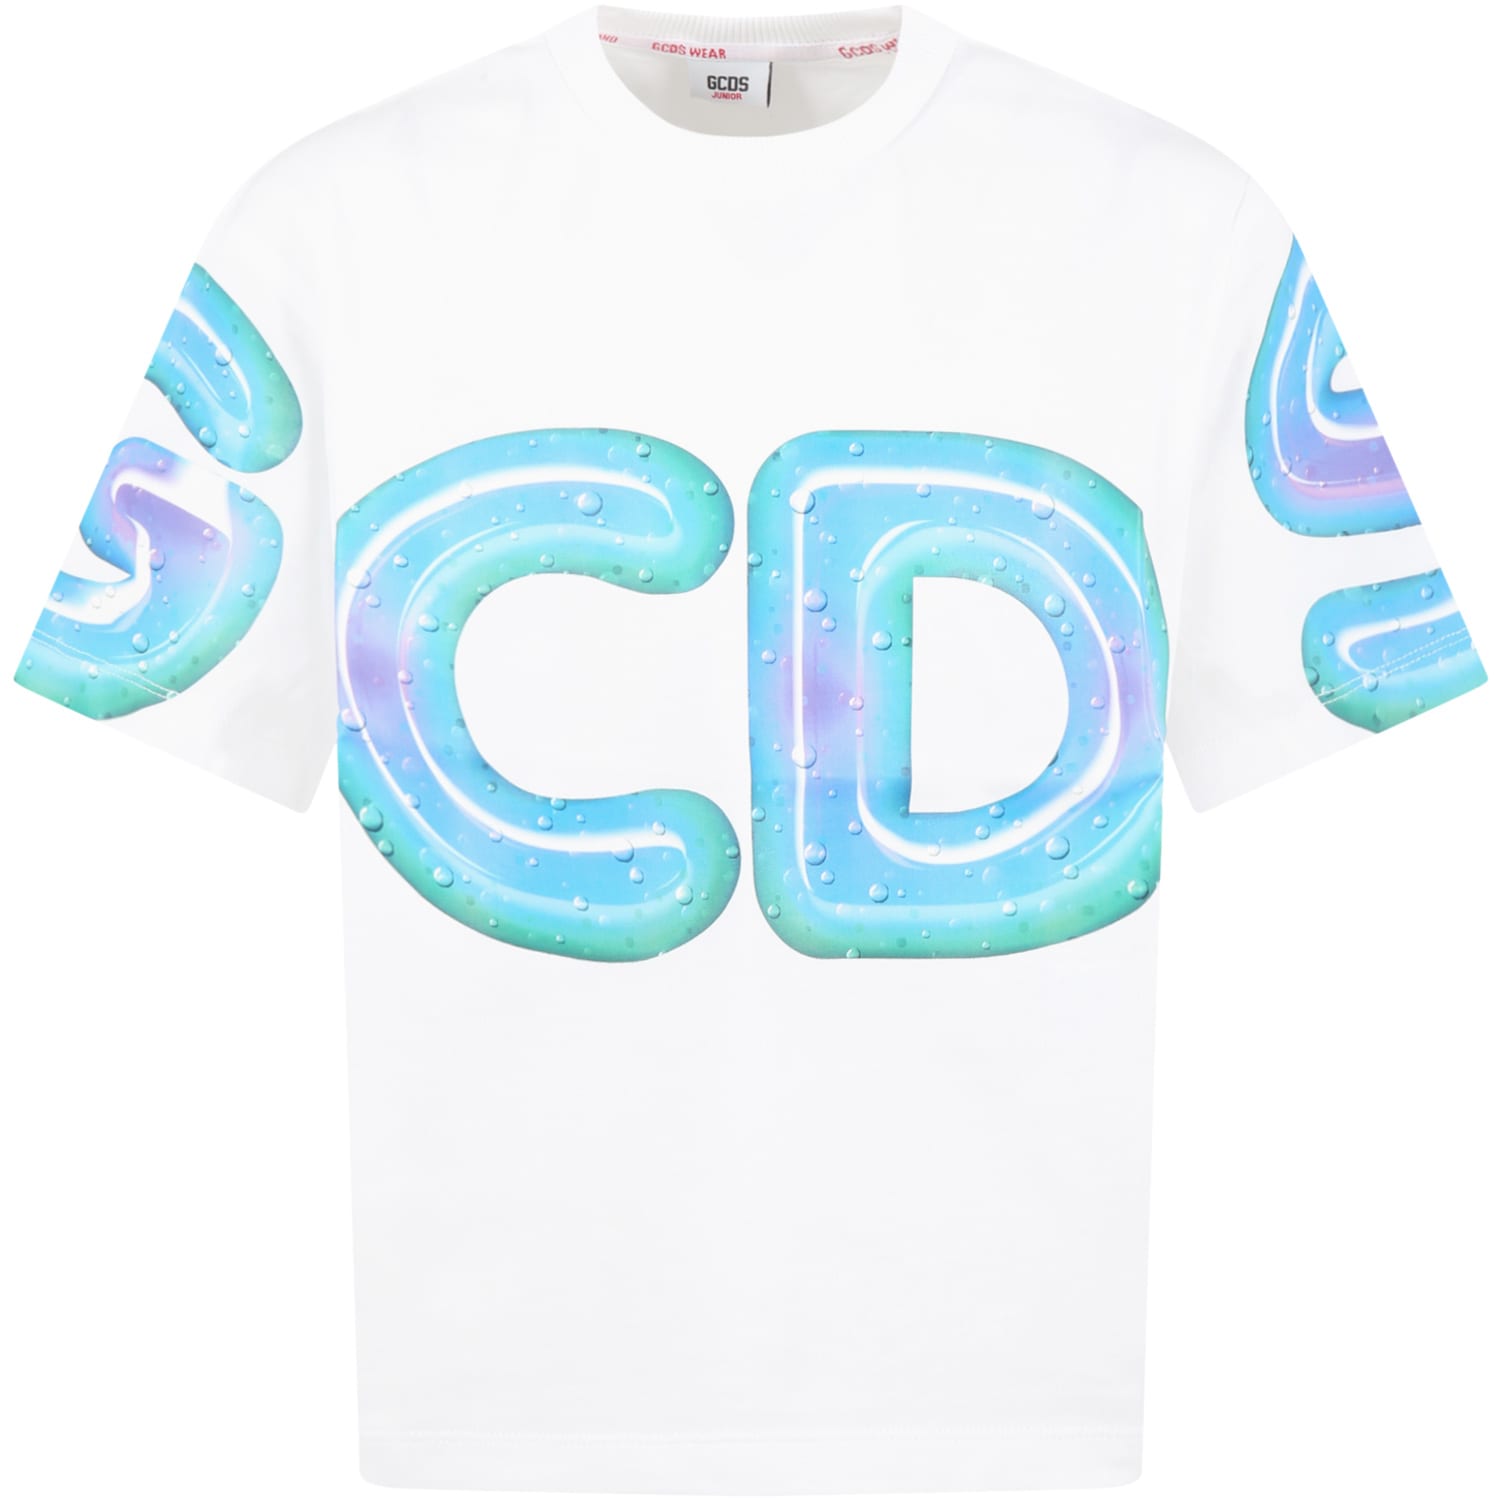 Gcds Mini Kids' White T-shirt For Boy With Multicolor Logo